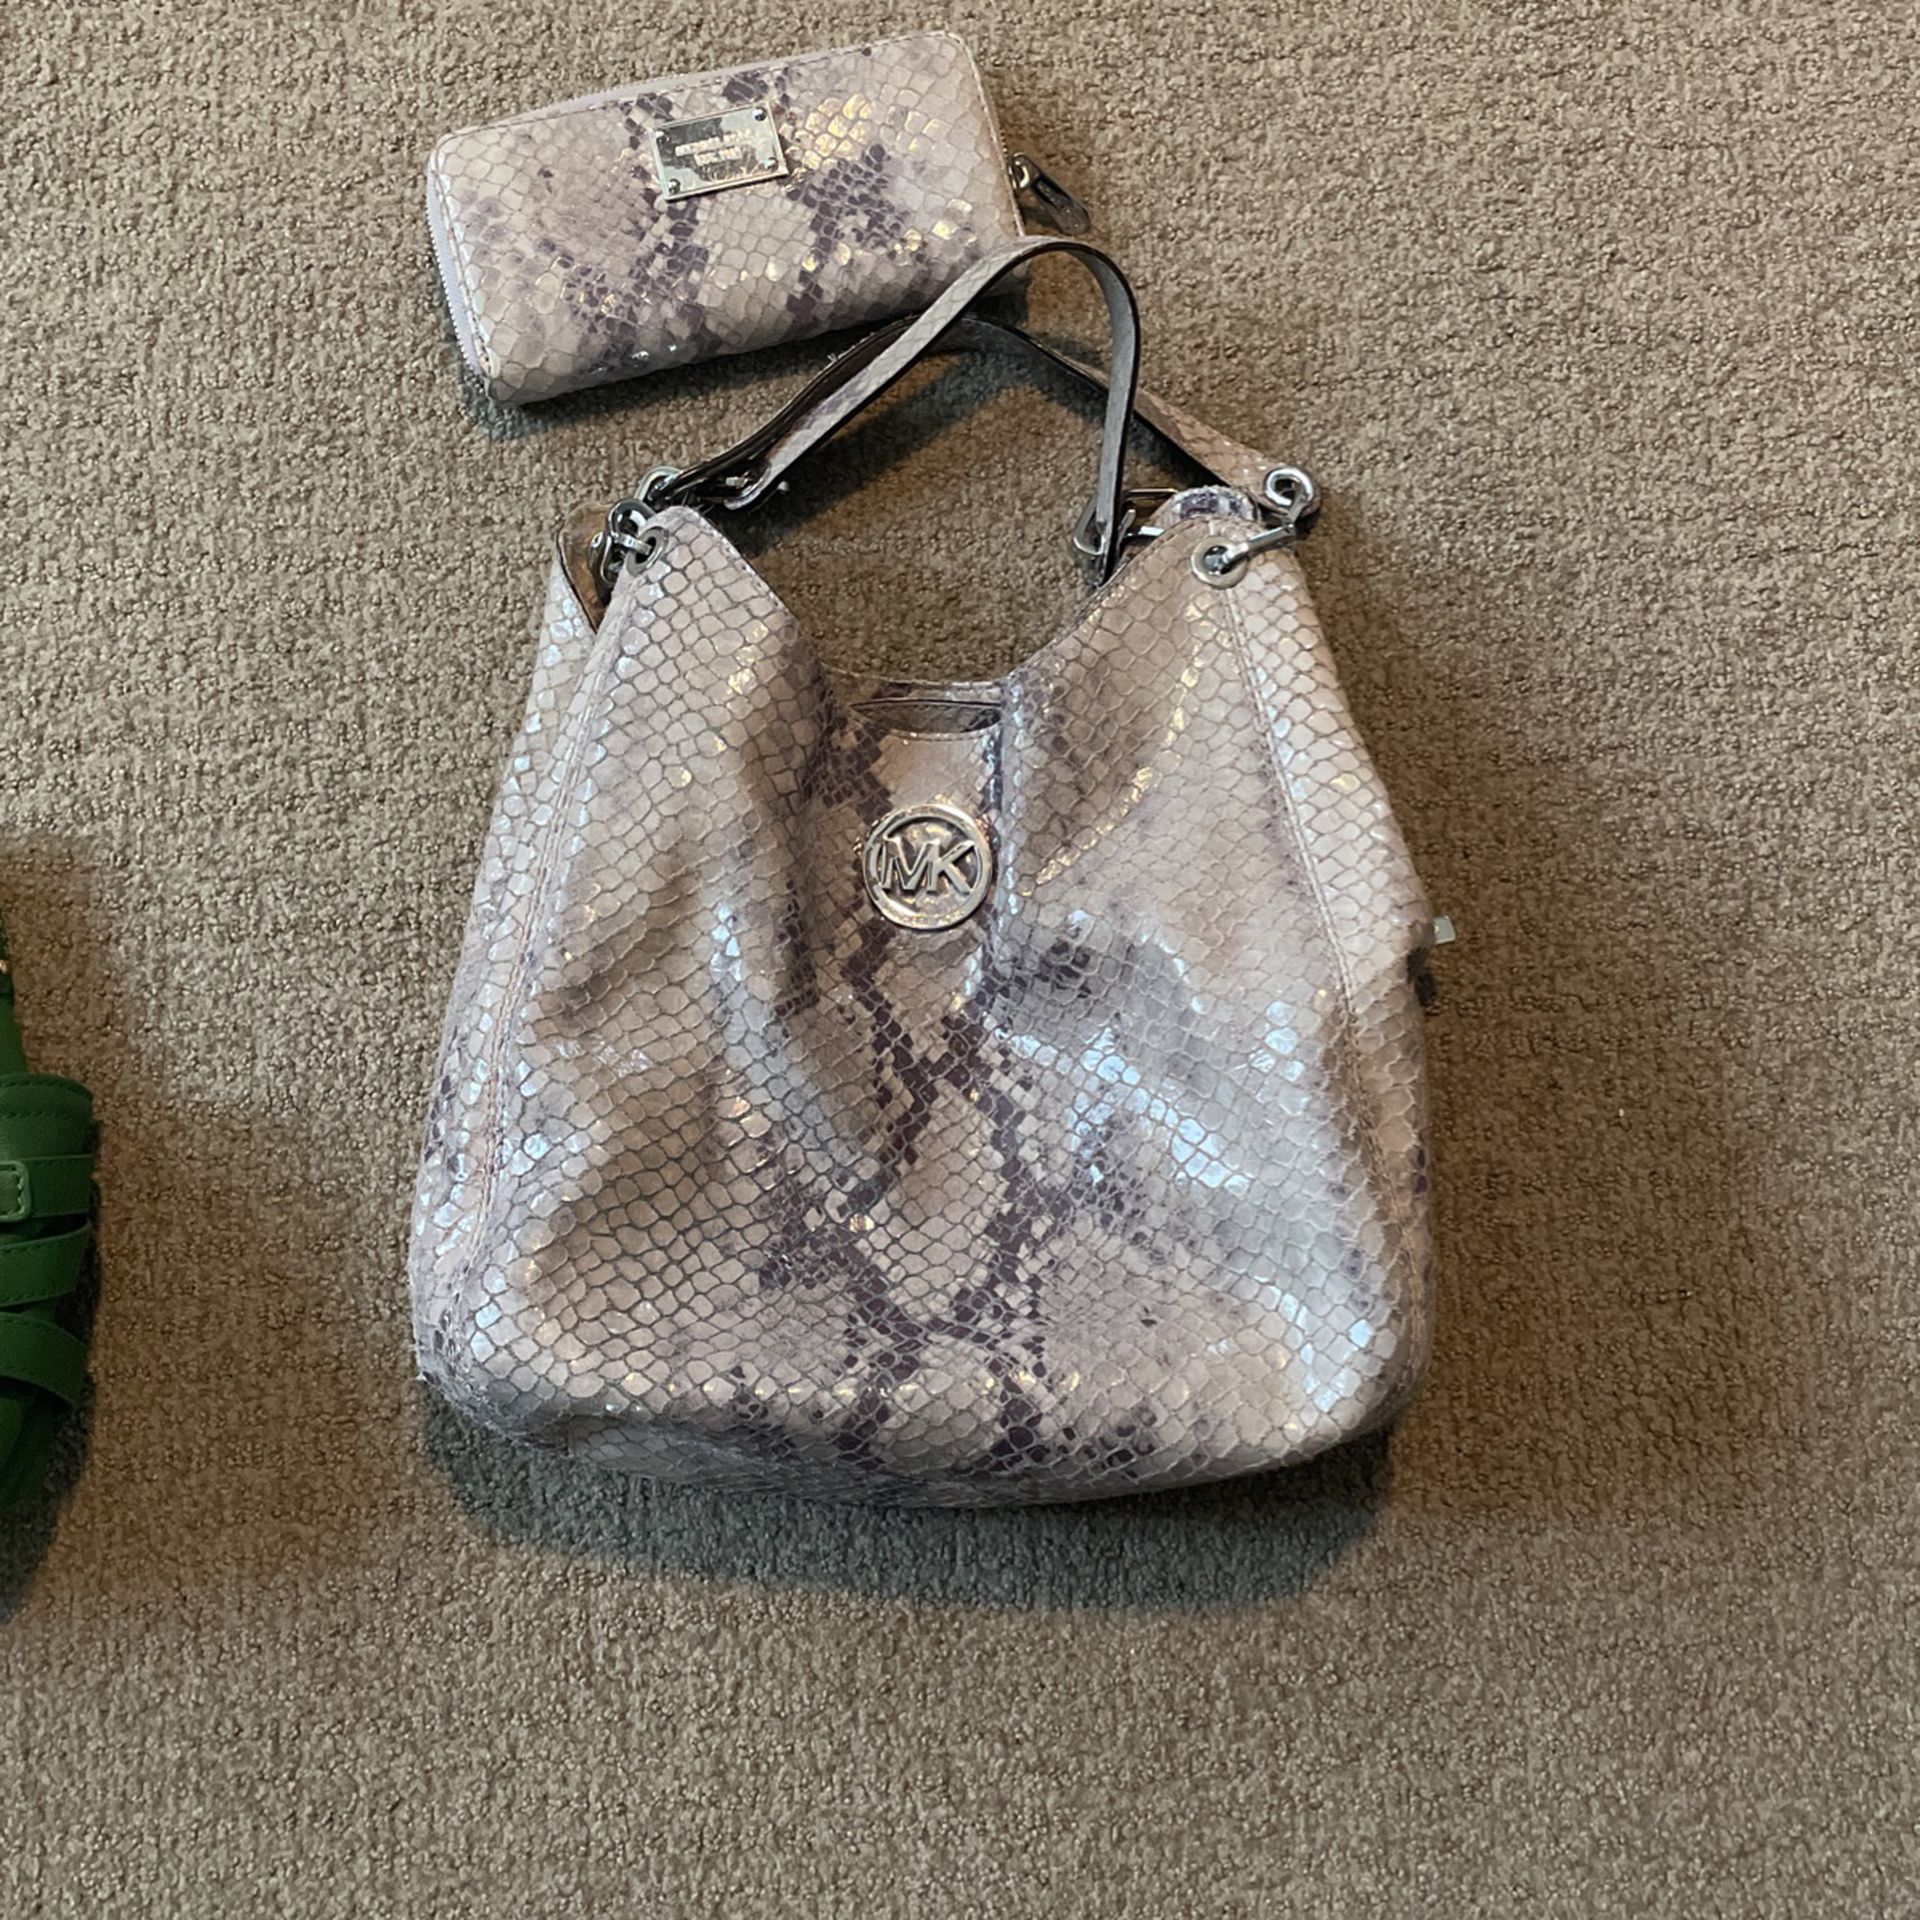 Michael Kors Snake Skin Purse And Wallet for Sale in Gilroy, CA - OfferUp